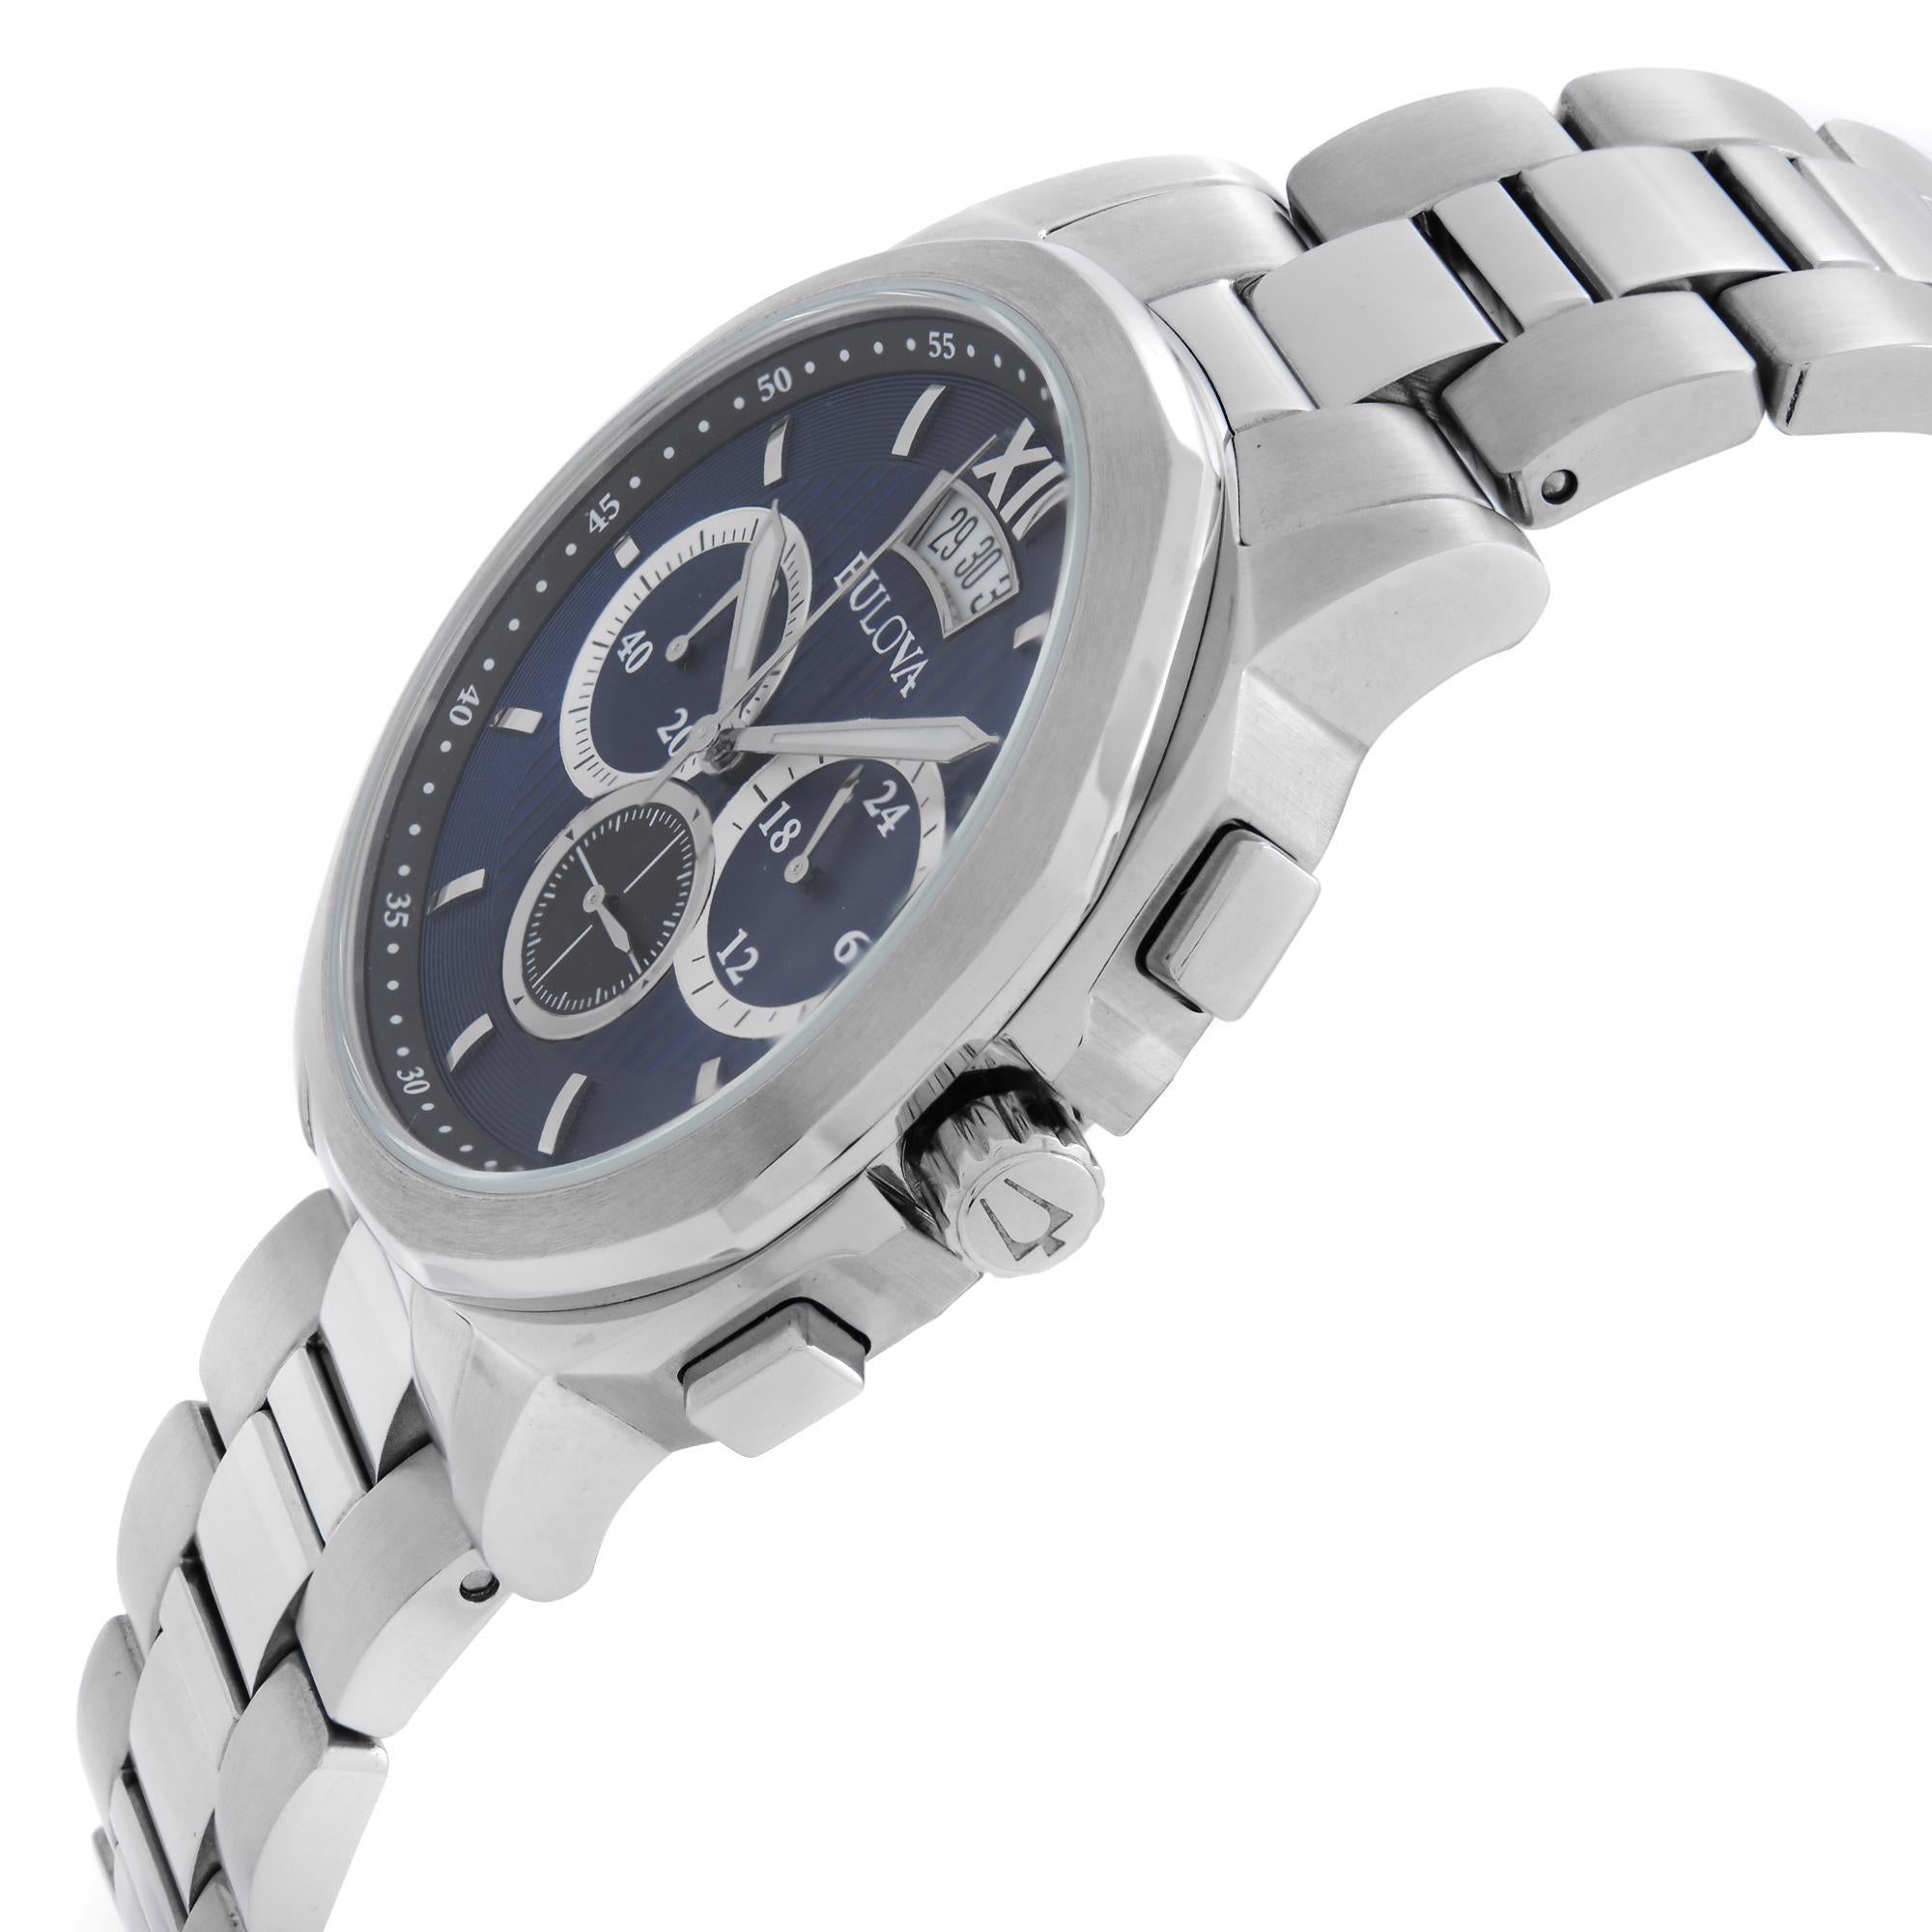 Display Model Bulova Classic 96B219. This Beautiful Timepiece is Powered by a Quartz (Battery) Movement and Features: Stainless Steel Case and Bracelet. Blue Dial with Luminous Silver-Tone Hands and Index Hour Markers. Roman Numeral appears at the